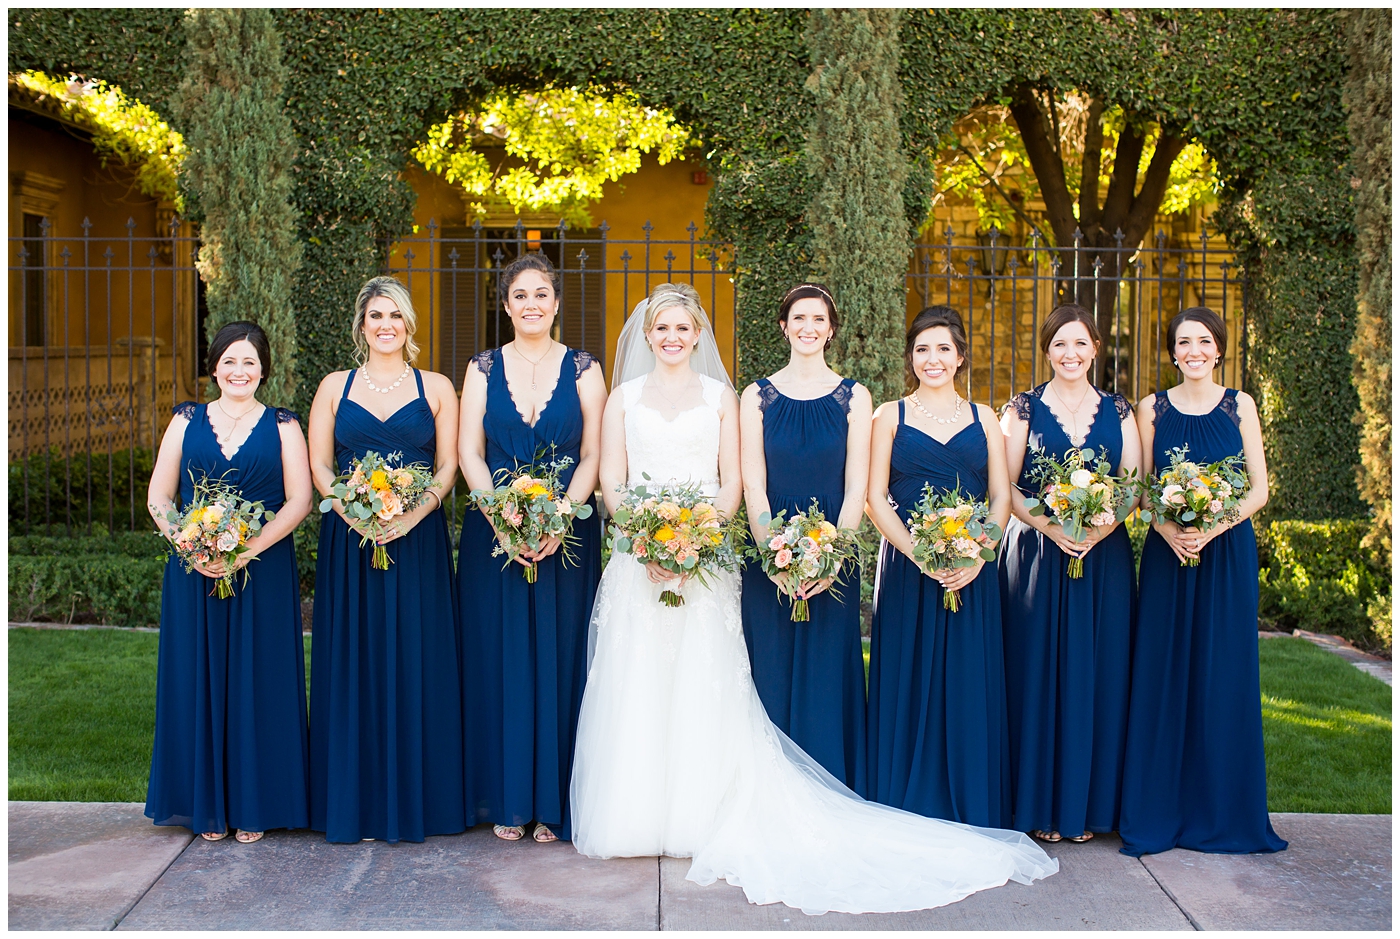 bride in essence designs wedding dress with cap sleeves portrait group shot with bridesmaids in navy blue long dresses